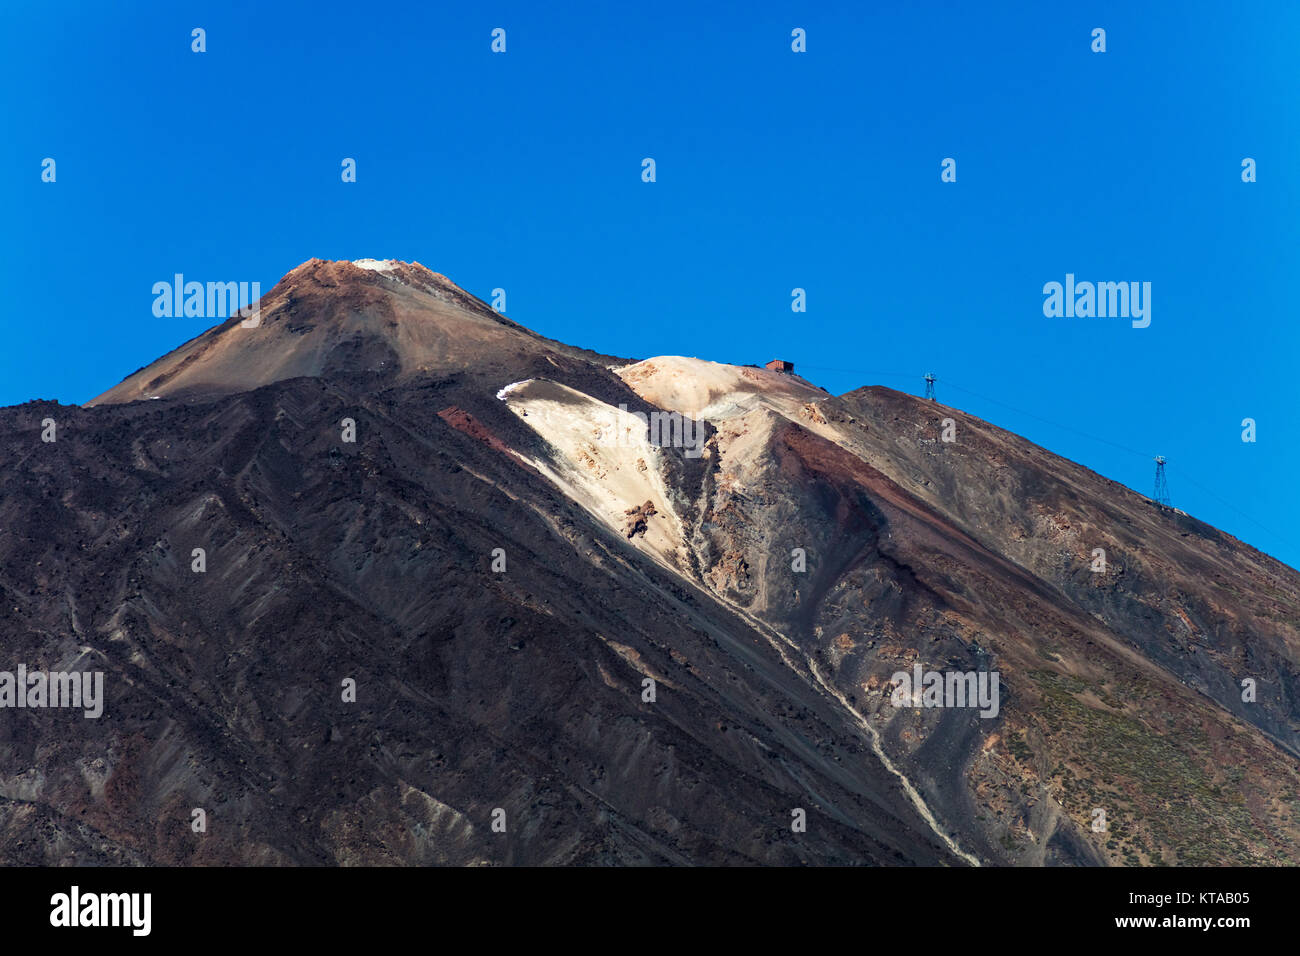 An uphill view of `Pico del Teide', the colourful Teide volcano in Teide National Park, Tenerife, Canary Islands. Stock Photo